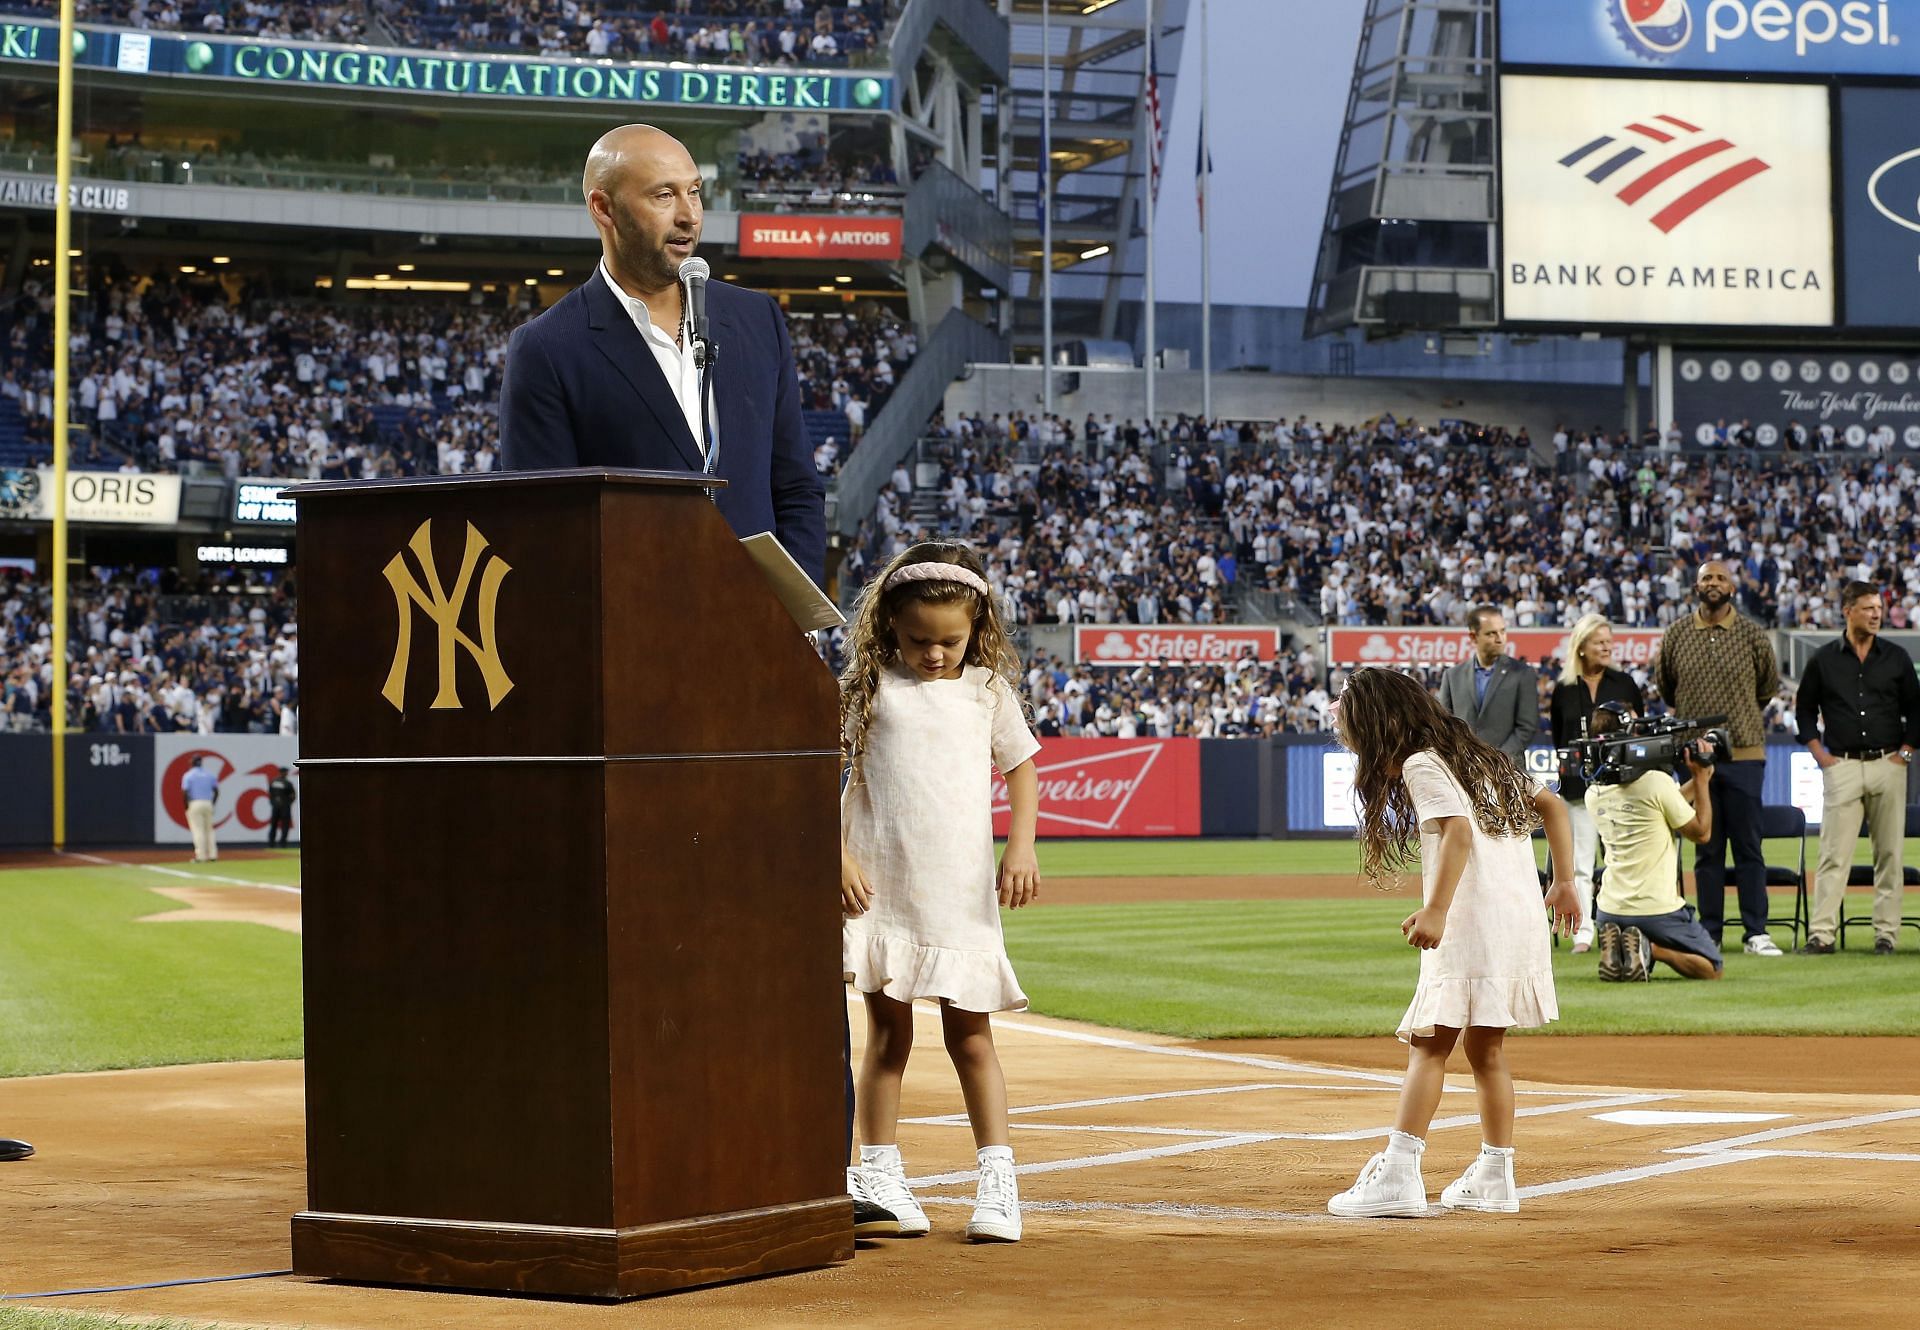 NEW YORK - SEPTEMBER 09: Baseball Hall of Famer Derek Jeter speaks to the fans alongside his daughters Bella(L) and Story as he is honored by the New York Yankees before a game against the Tampa Bay Rays at Yankee Stadium on September 09, 2022, in the Bronx borough of New York City. (Photo by Jim McIsaac/Getty Images)